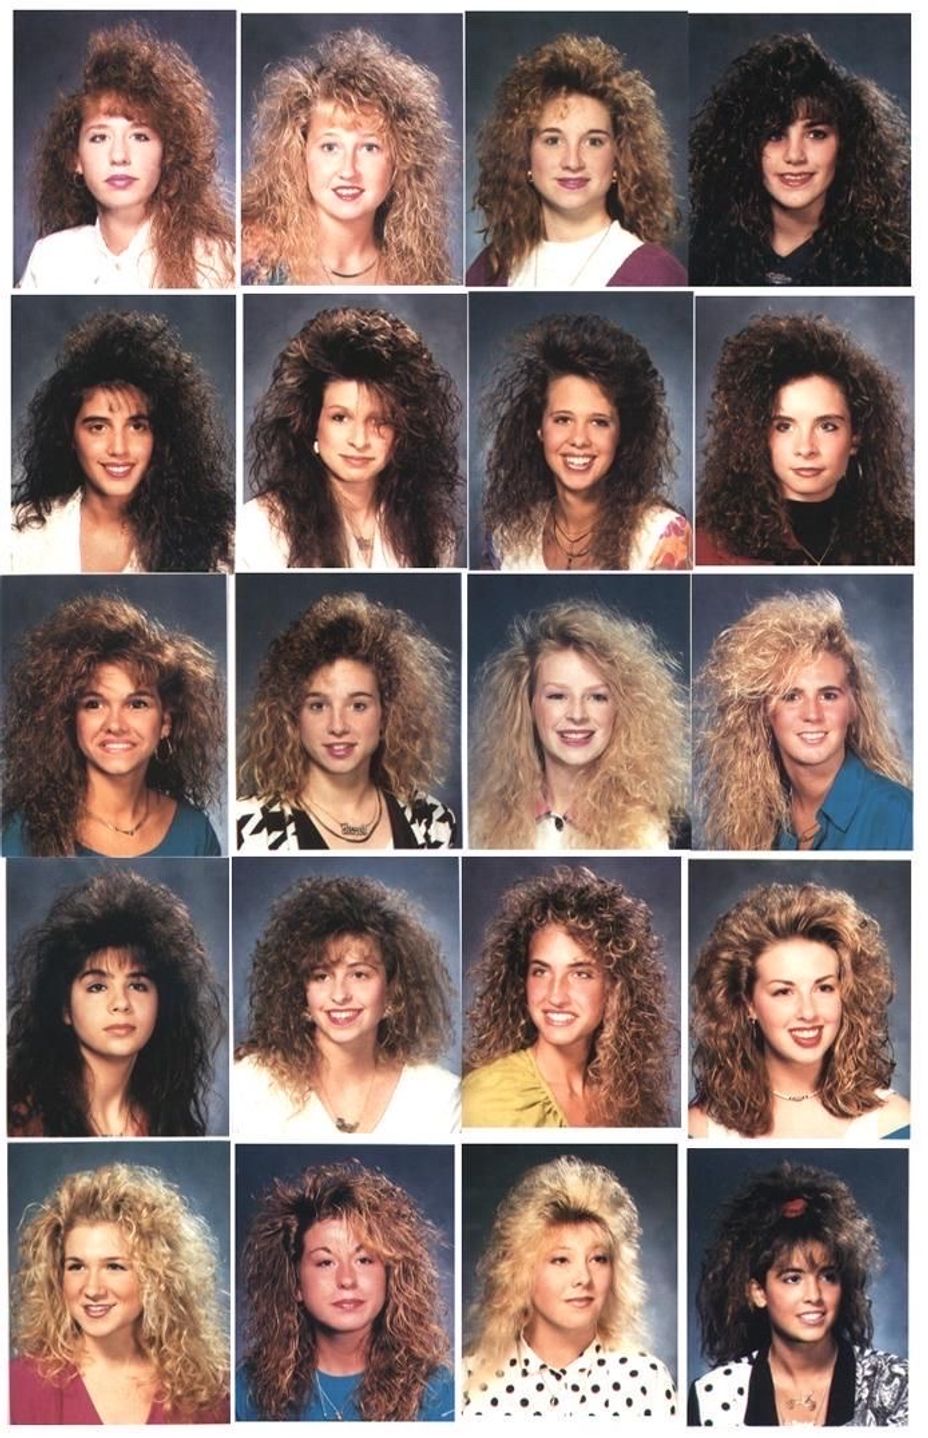 <p>Greetings GenXers! Some big 80s hair to bring you back!</p>